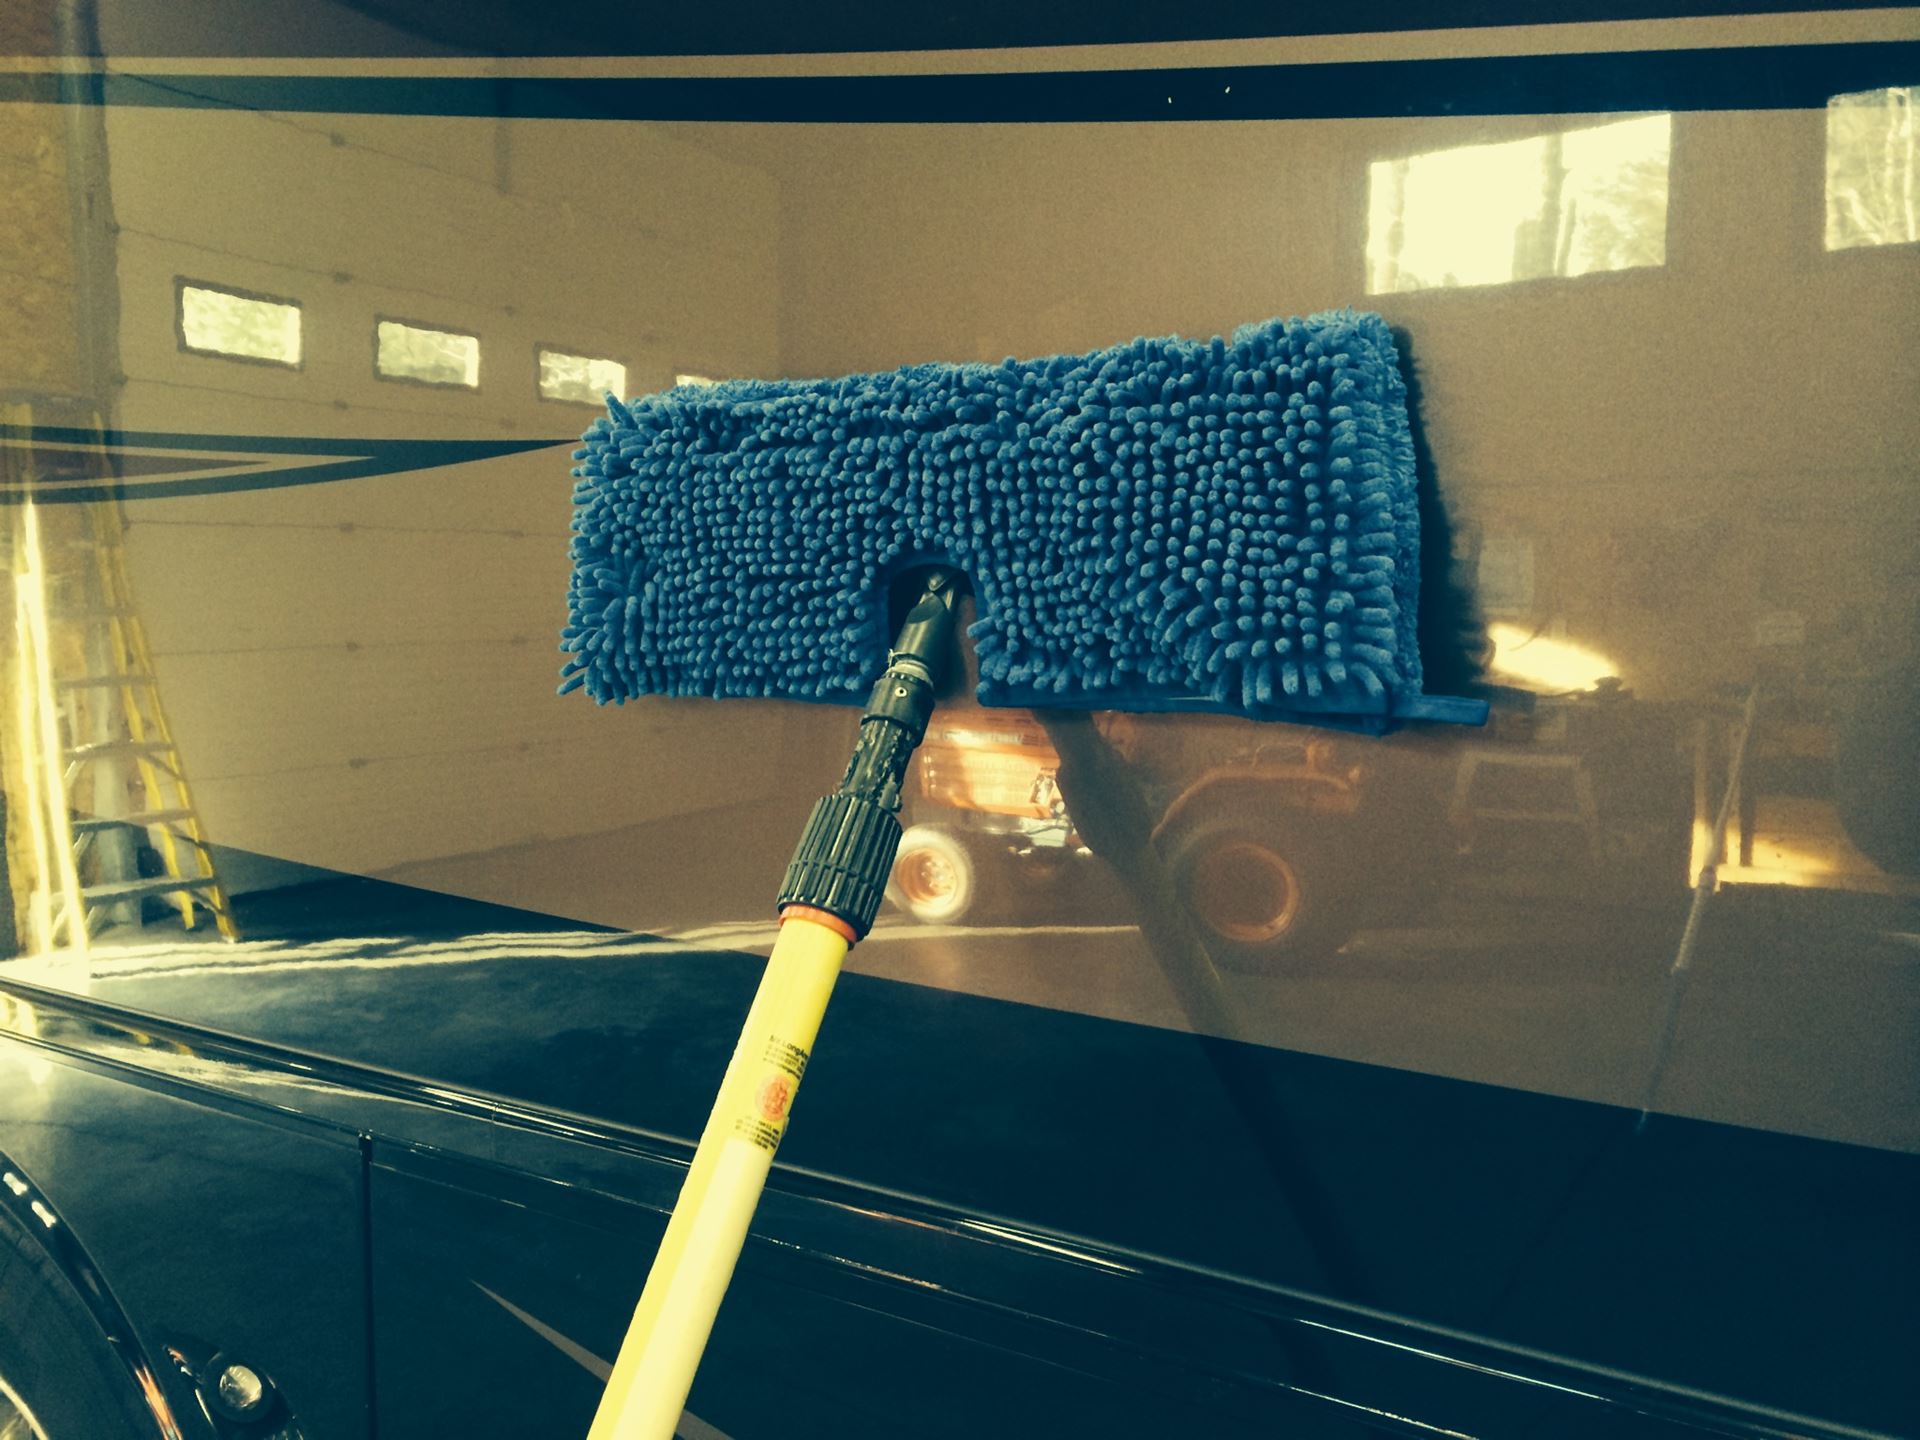 BIG TRUCK & RV WASH MOP. Professional Detailing Products, Because